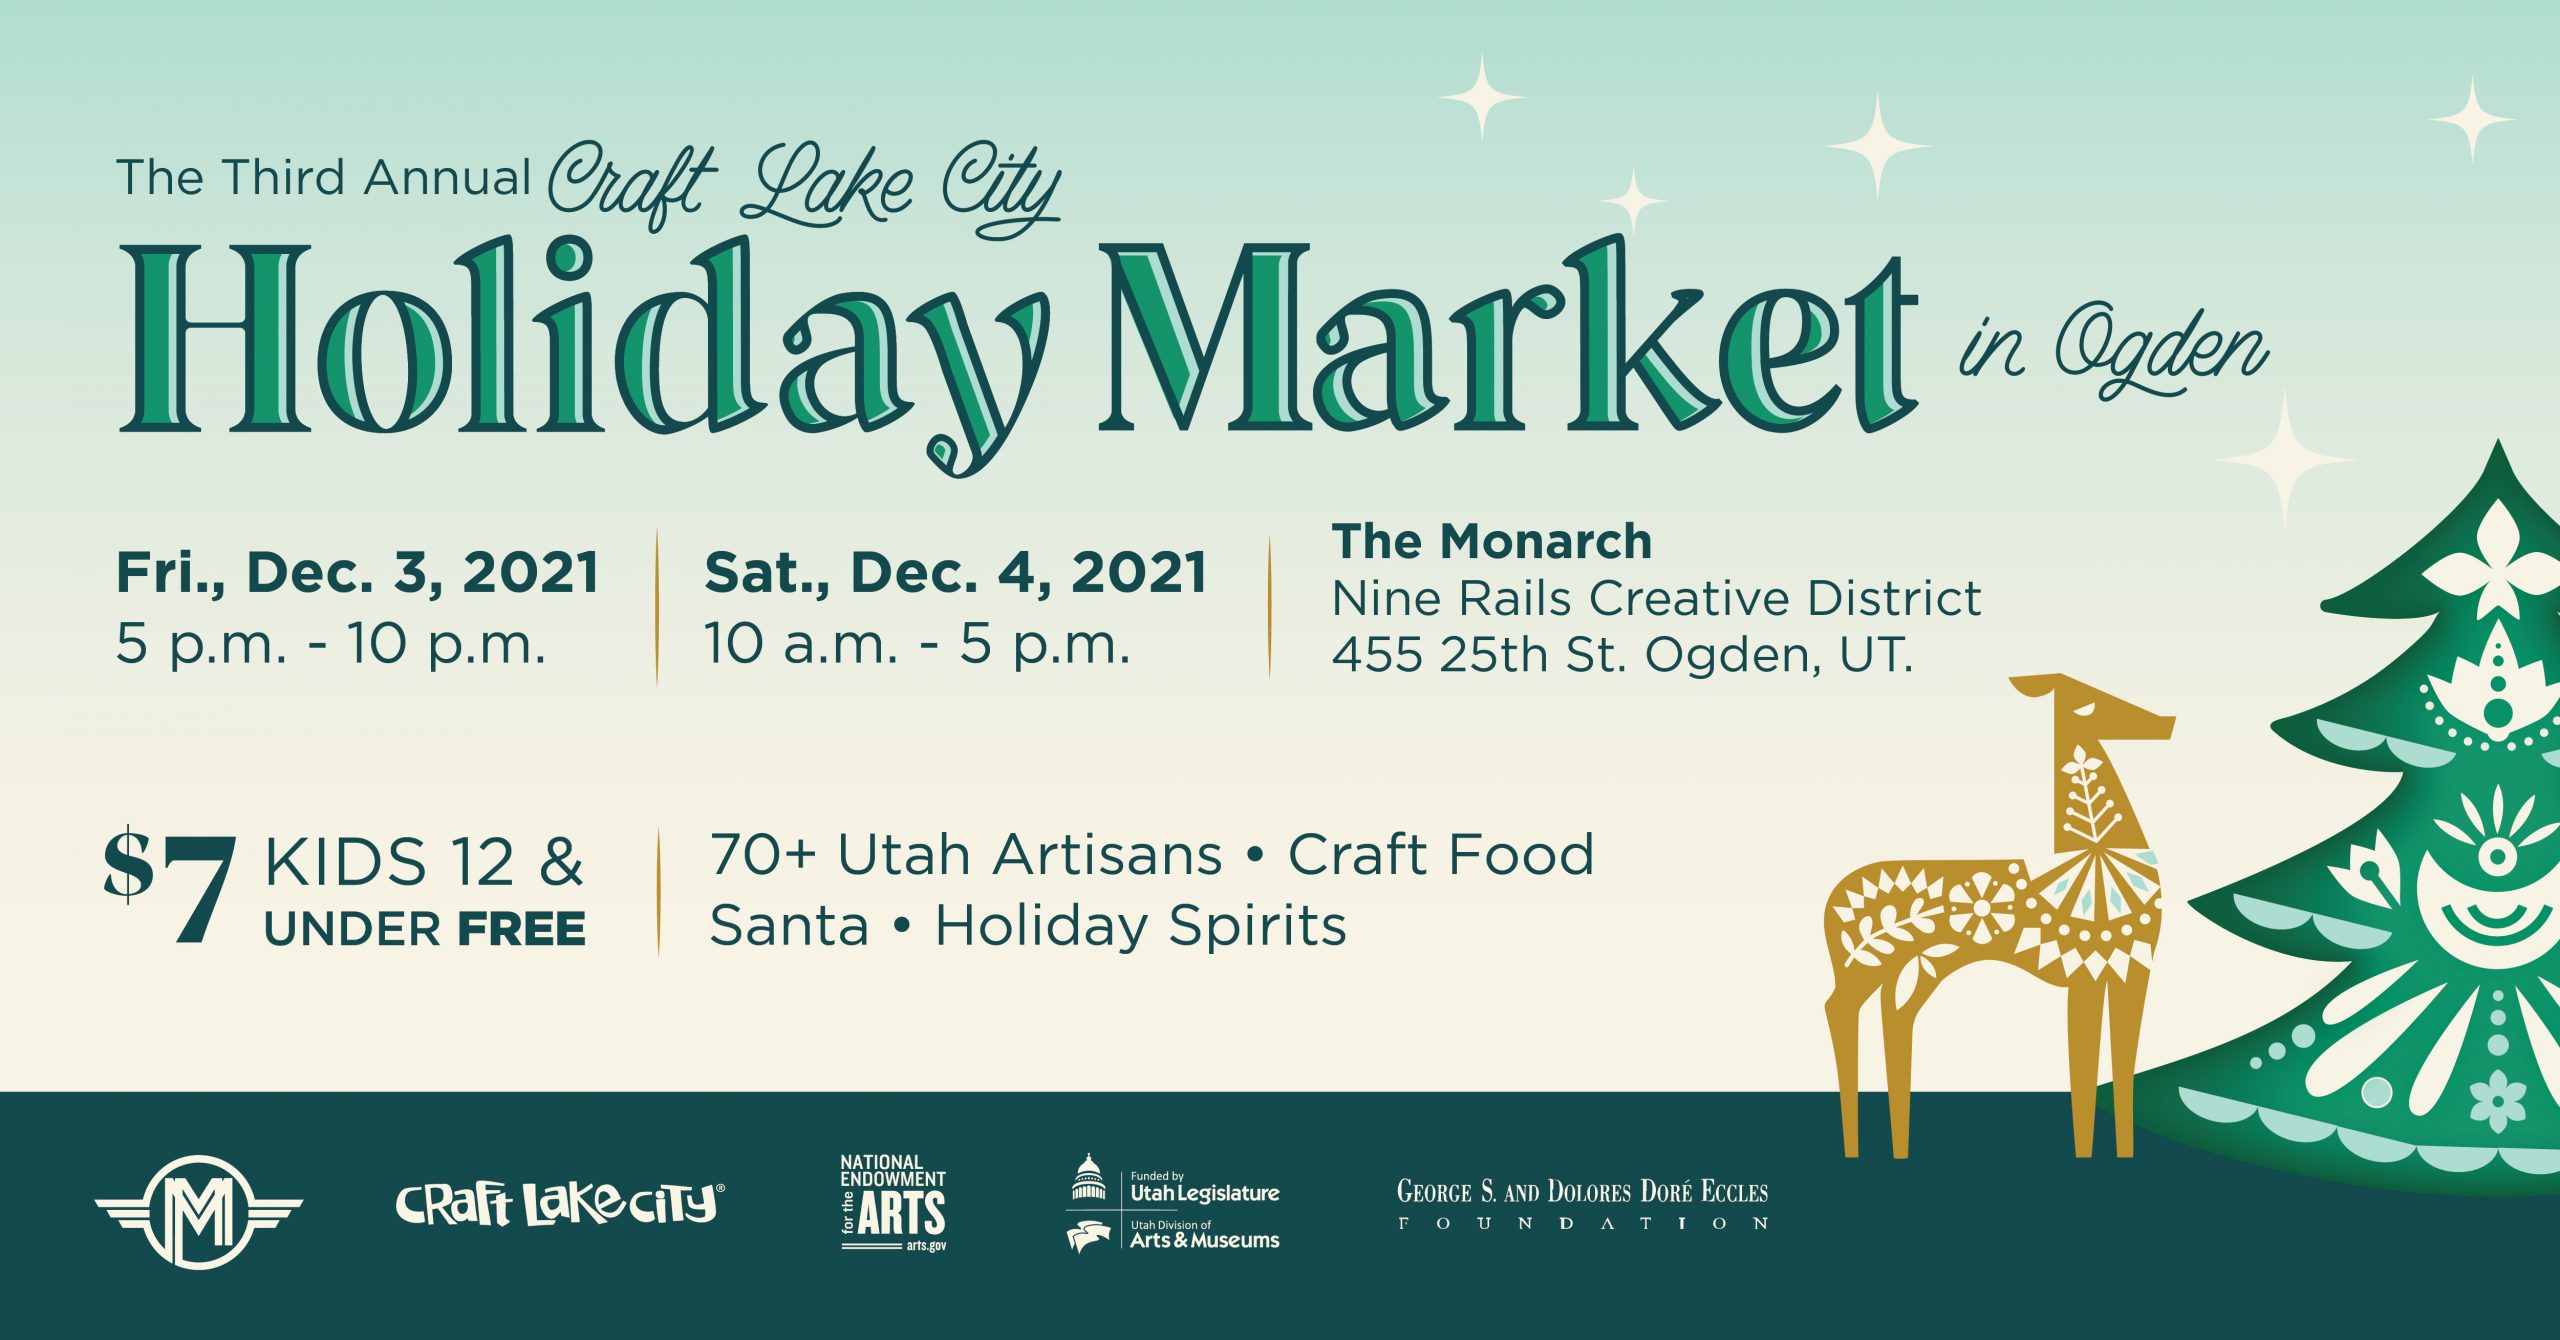 Tickets Are Now Available for the Third Annual Craft Lake City Holiday Market!